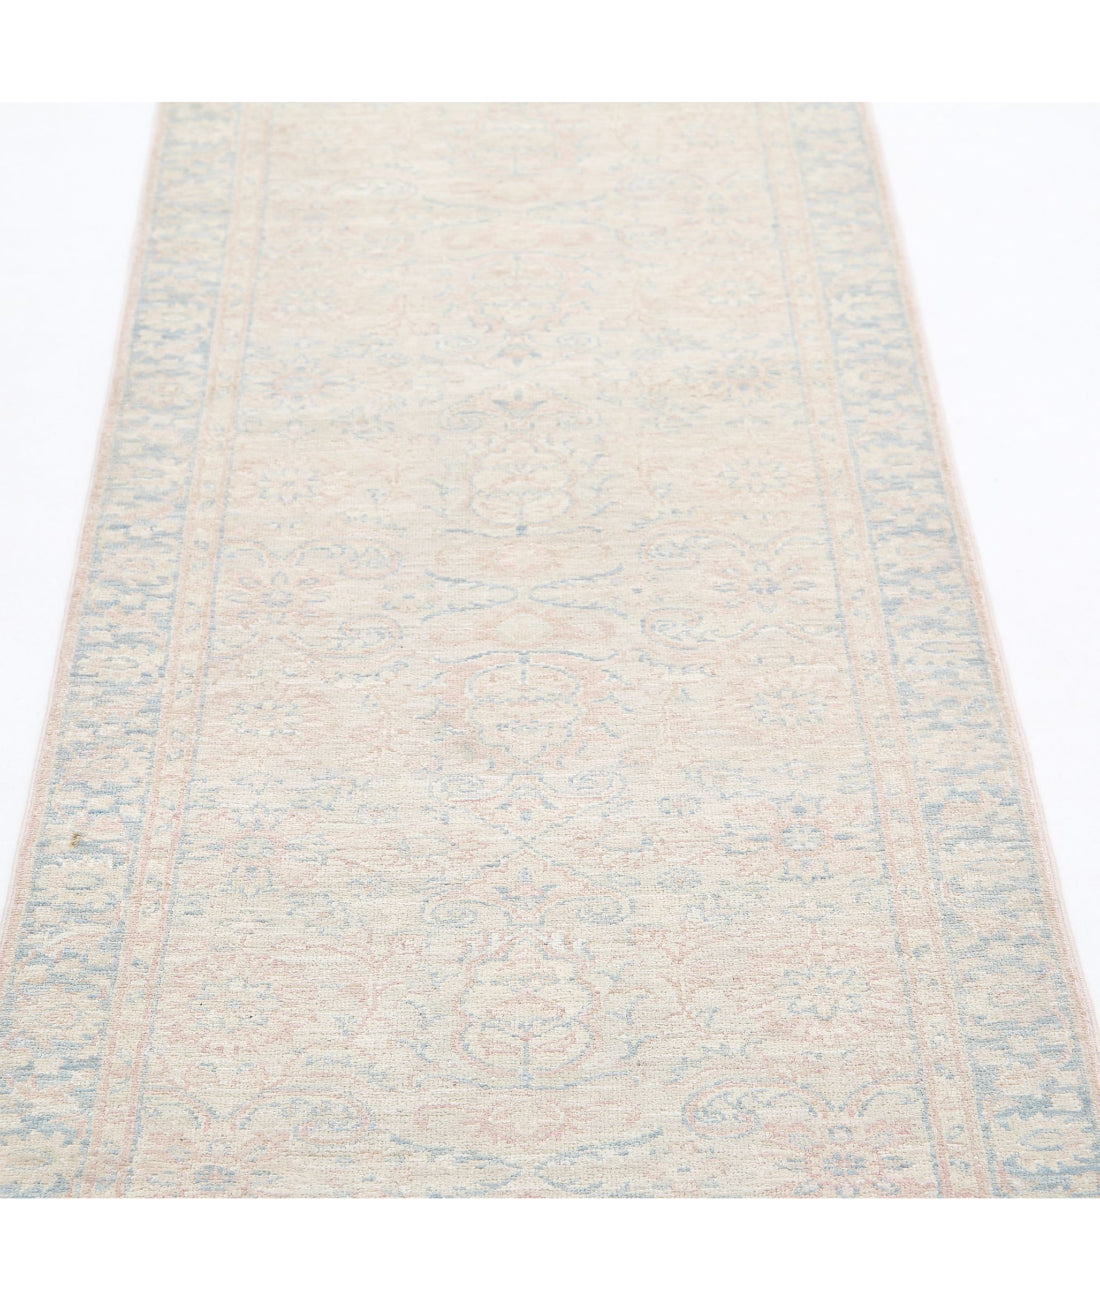 Serenity 2'5'' X 11'5'' Hand-Knotted Wool Rug 2'5'' x 11'5'' (73 X 343) / Ivory / Grey